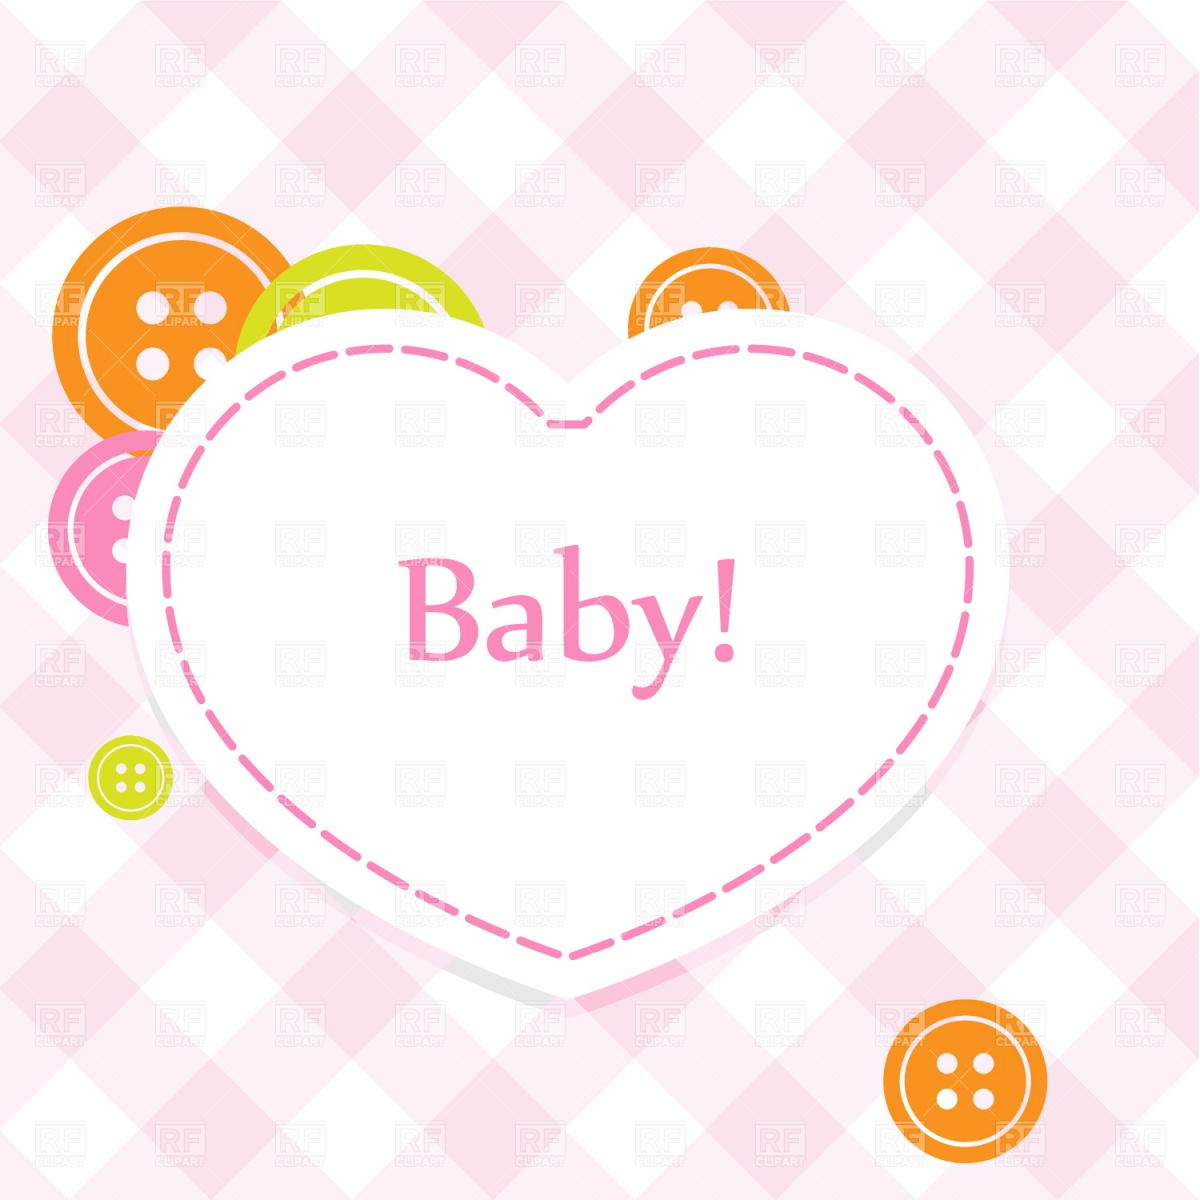 Baby background, Borders and Frames, download Royalty-free vector ...